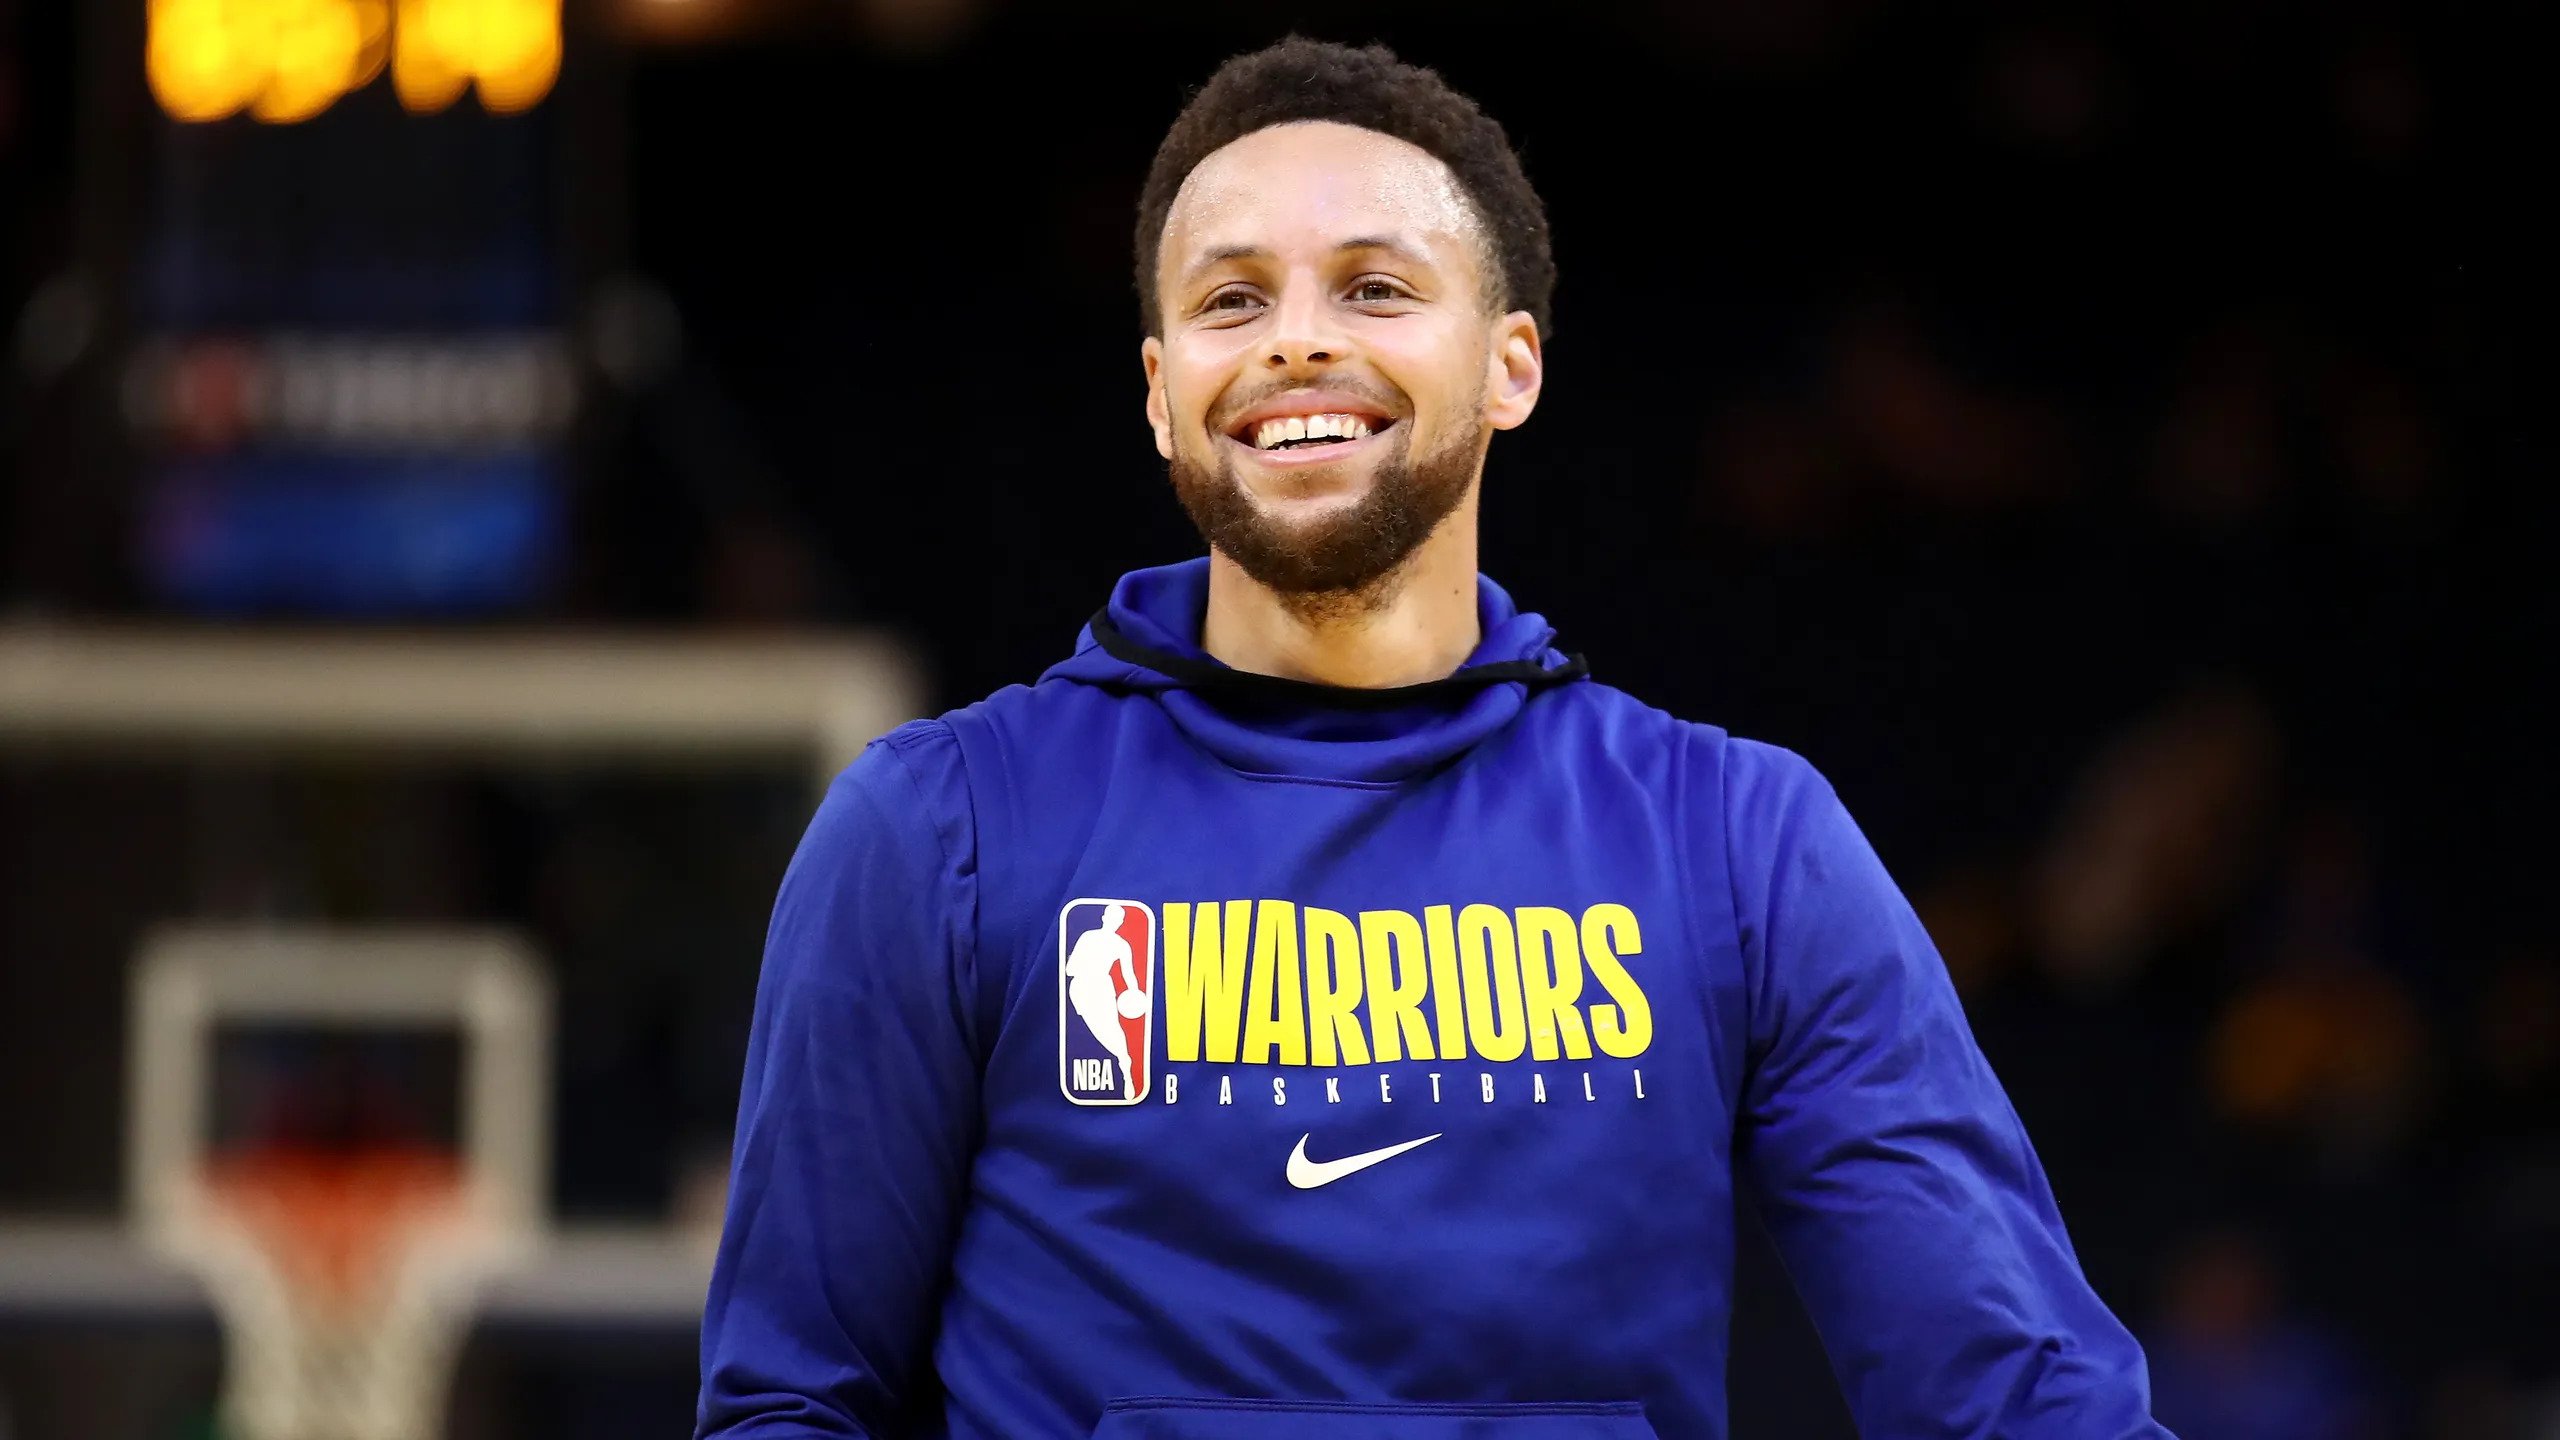 33 Facts about Steph Curry - Facts.net